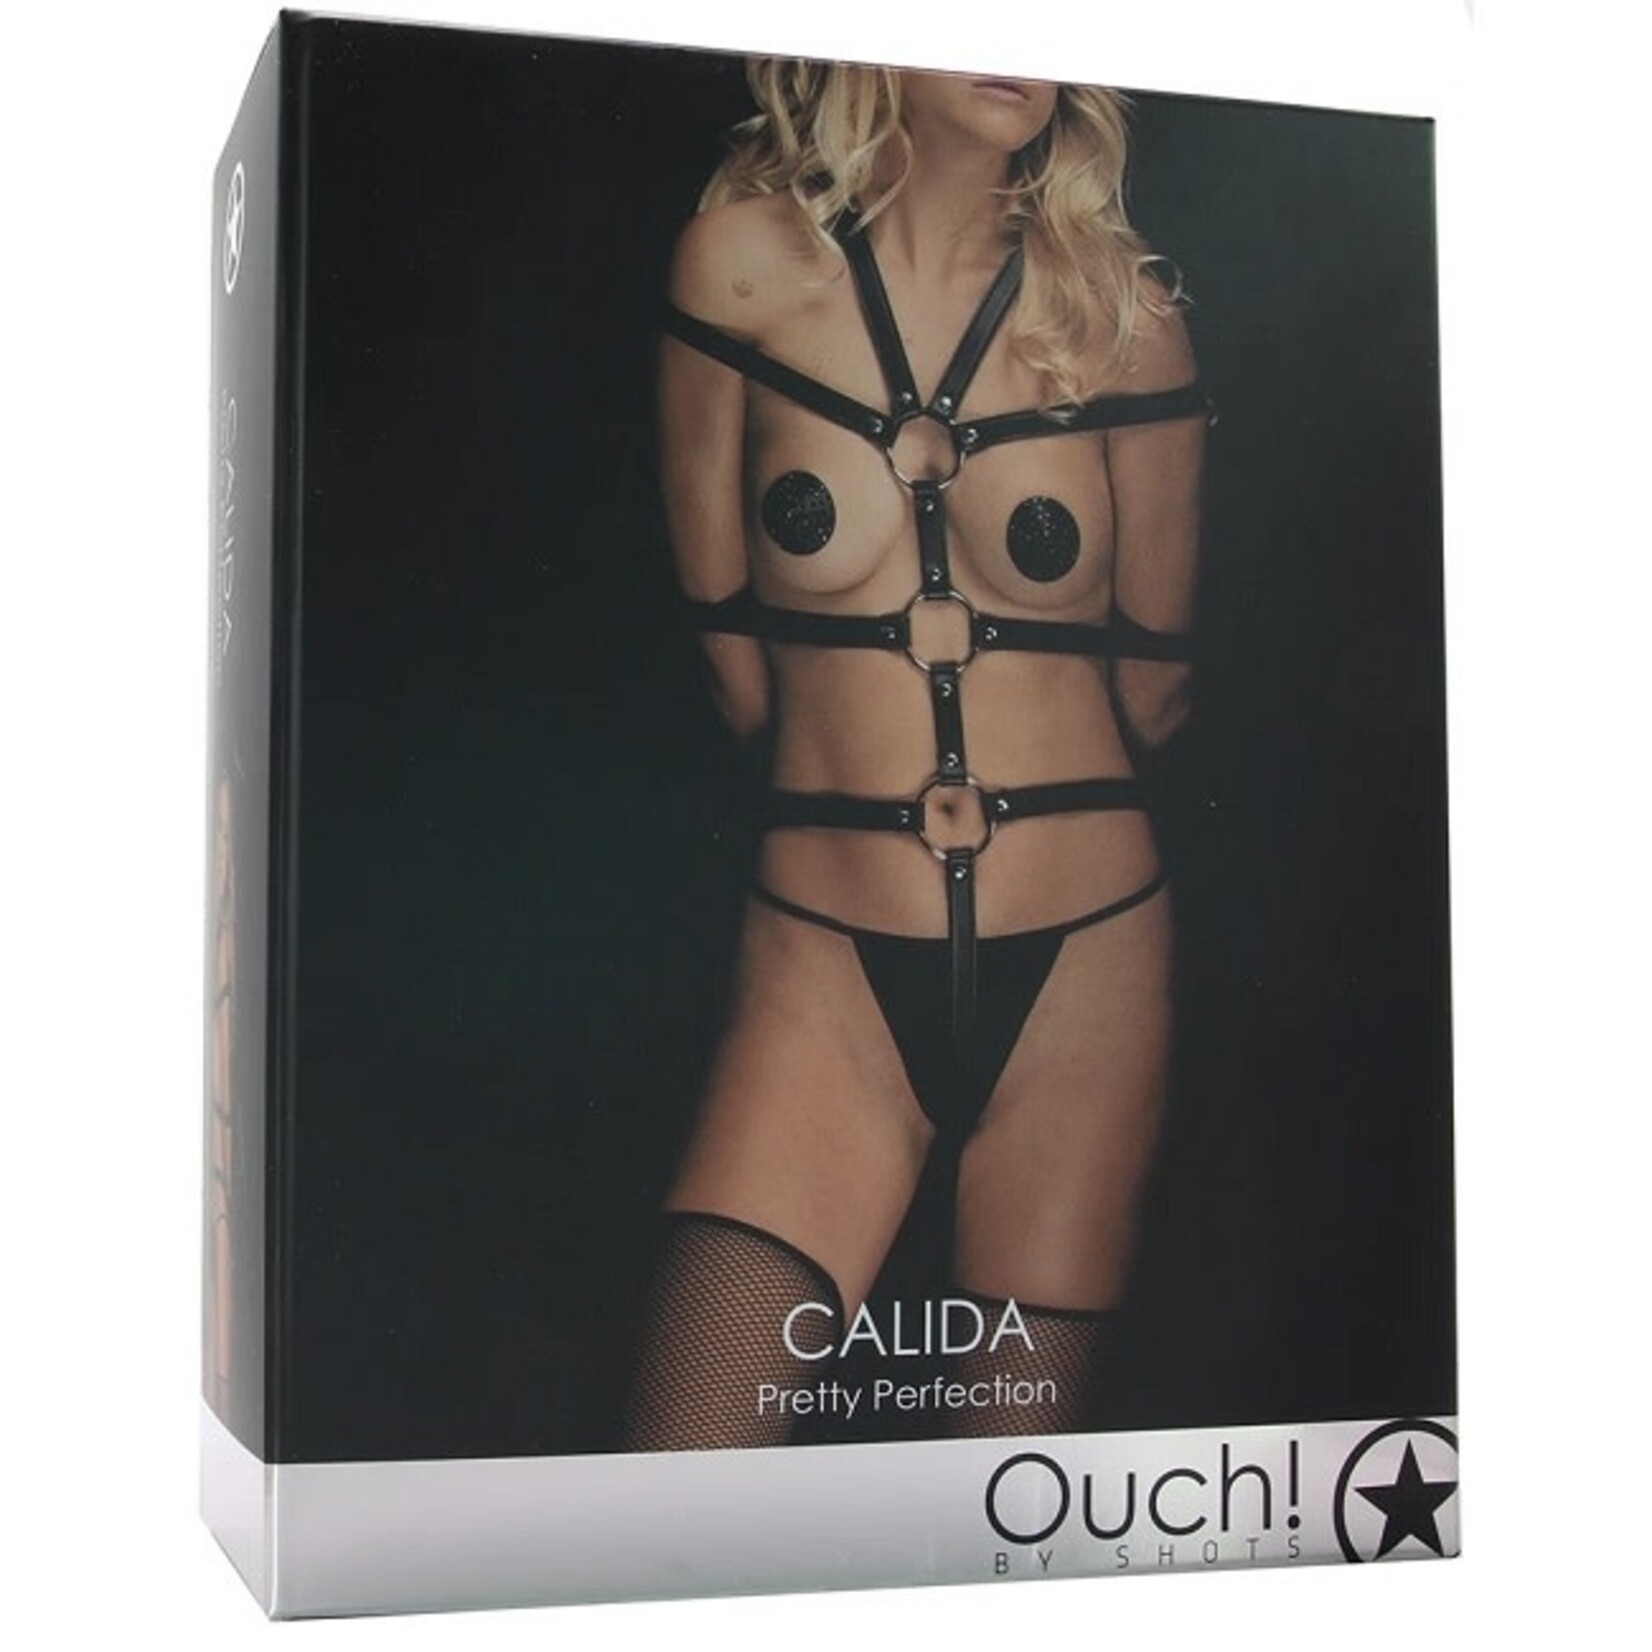 Shots America Ouch! Calida Pretty Perfection Harness